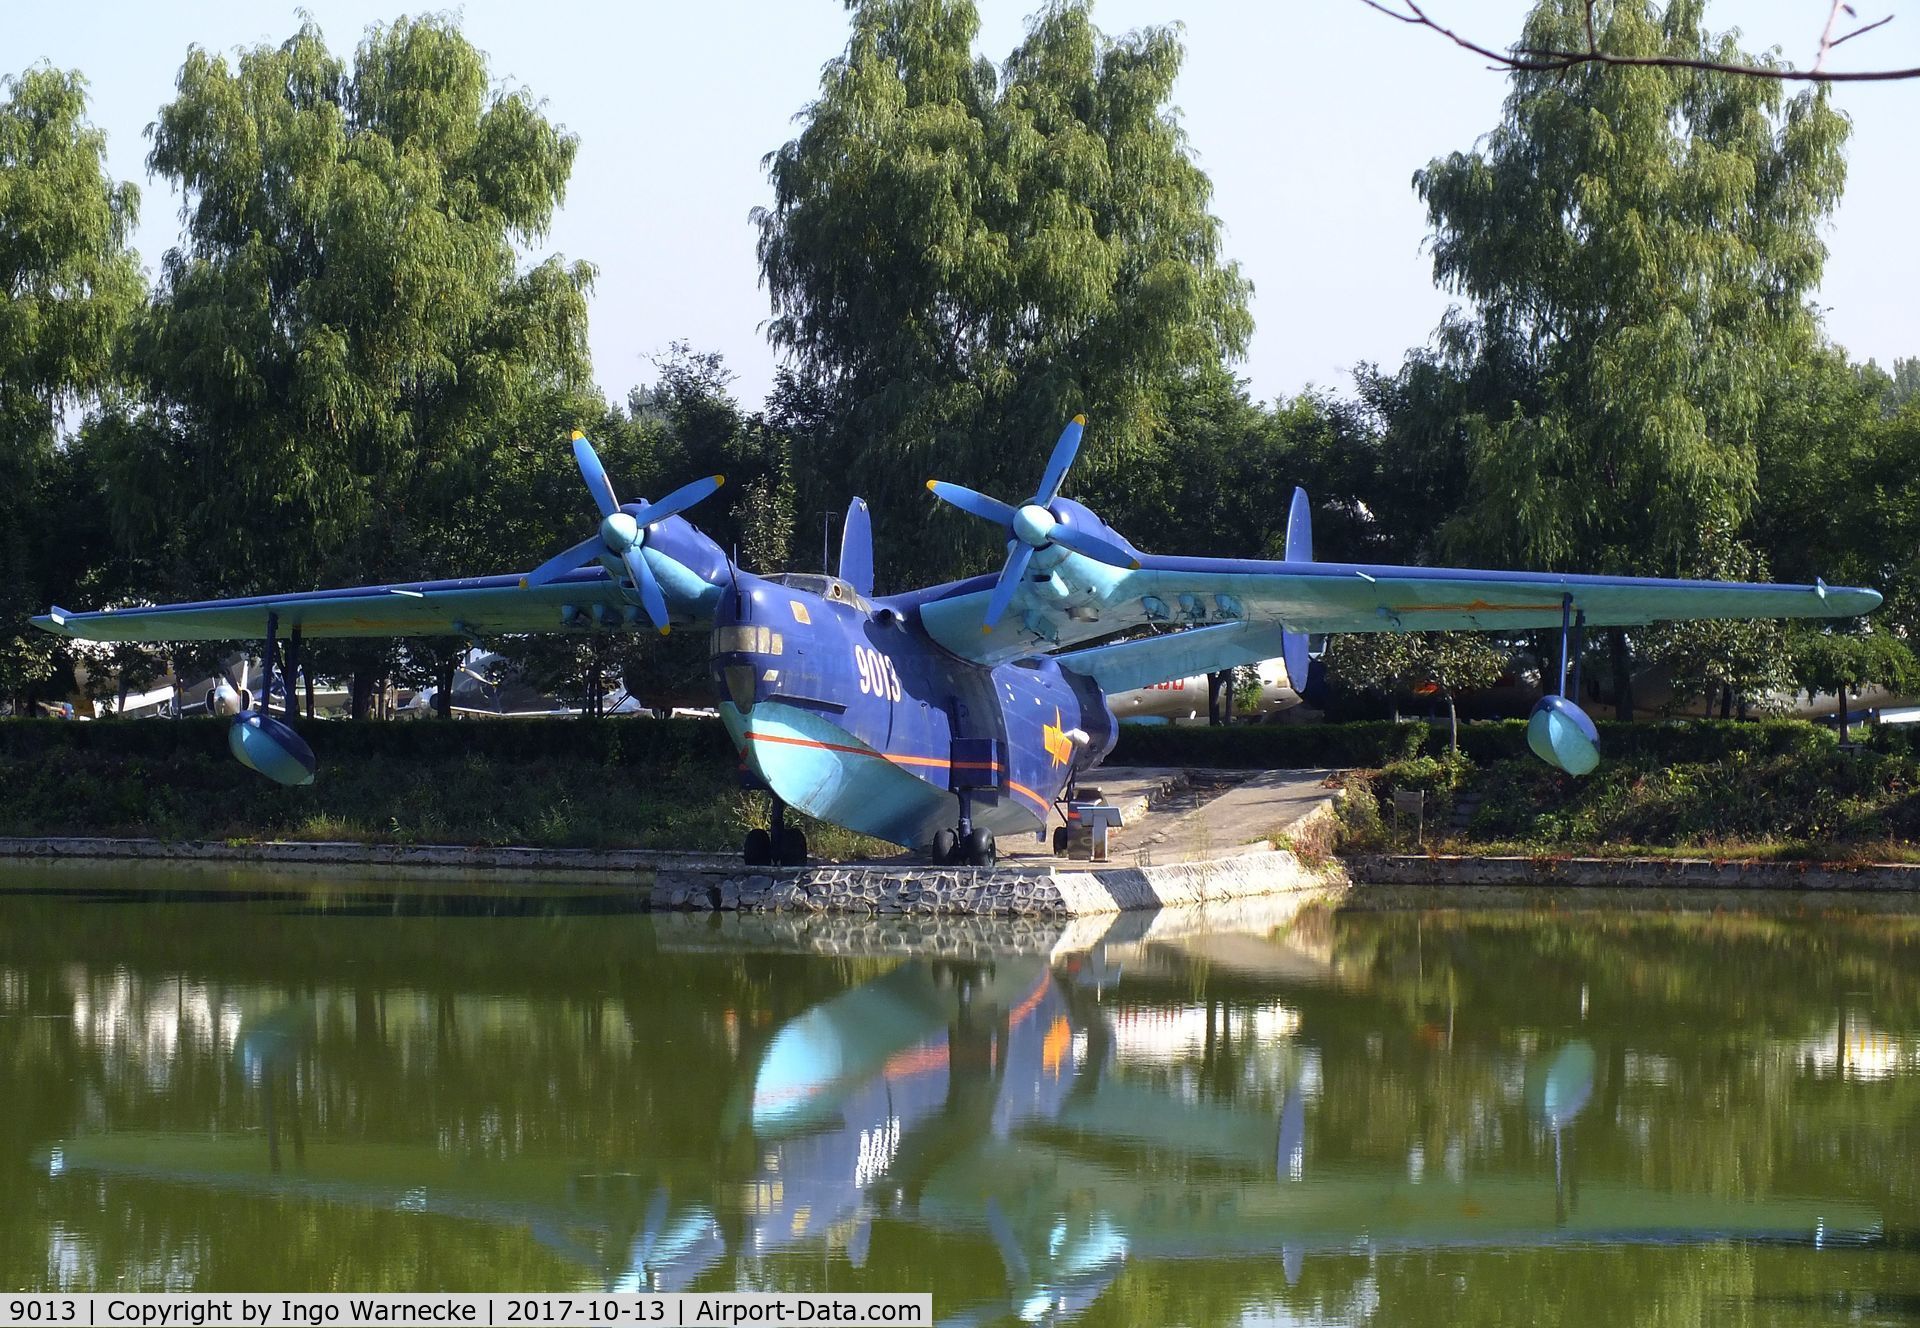 9013, Beriev Be-6P C/N 9013, Beriev Be-6 (Qing-6 re-engined with Wopen WJ-6 turboprops) at the China Aviation Museum Datangshan